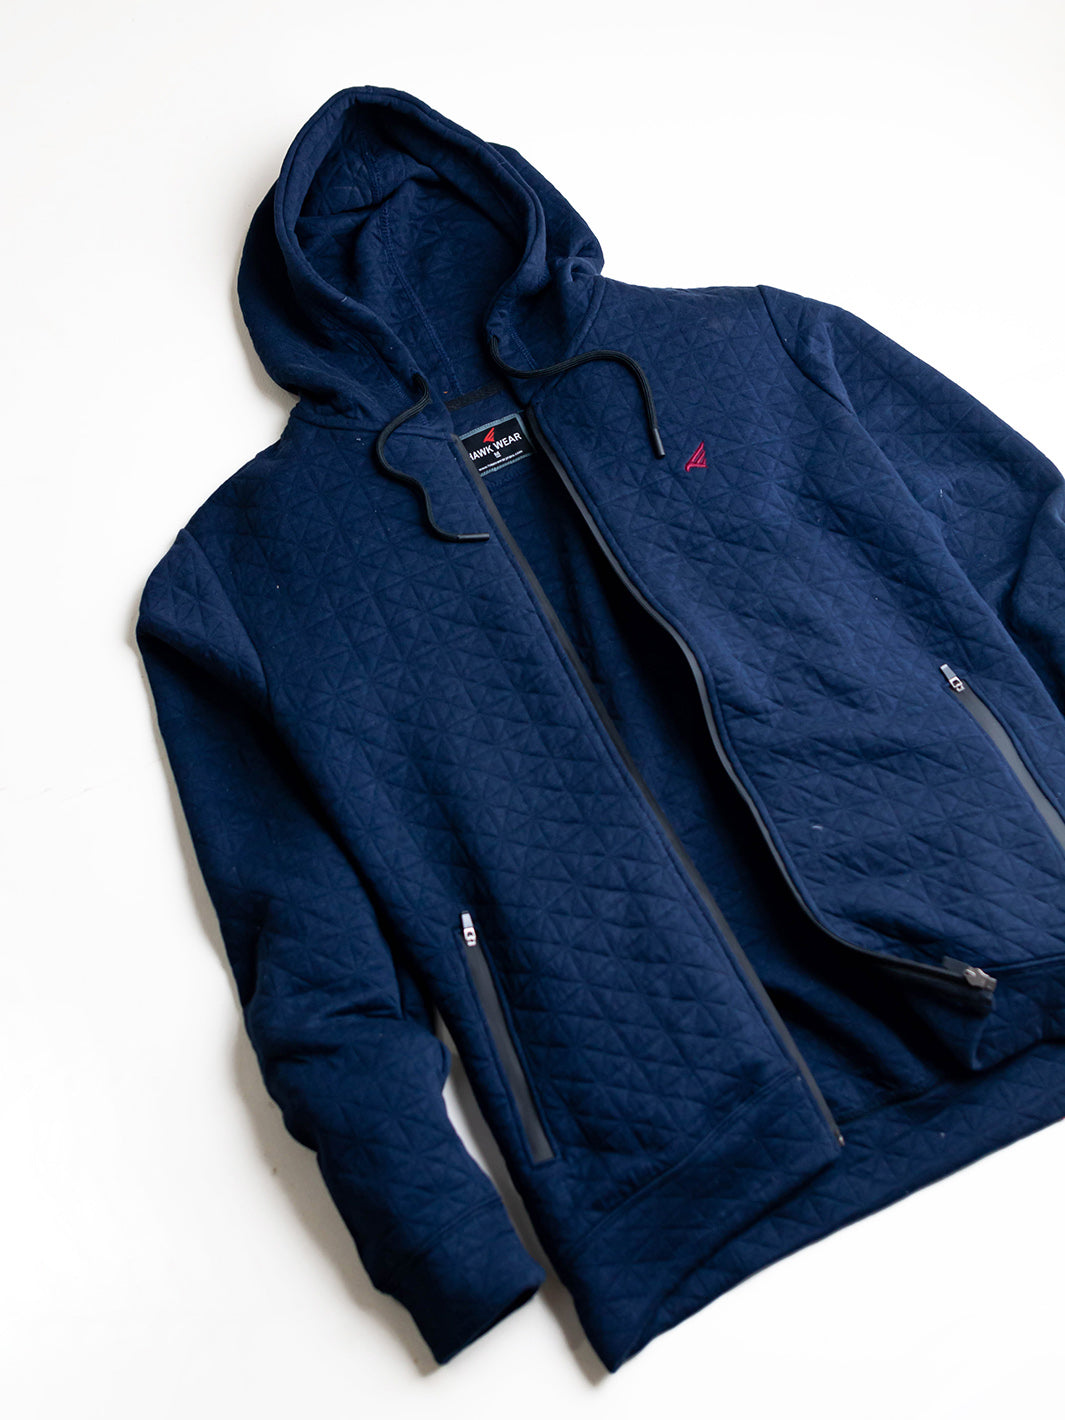 NAVY QUILTED HOODIE FULL ZIPPER - VONS